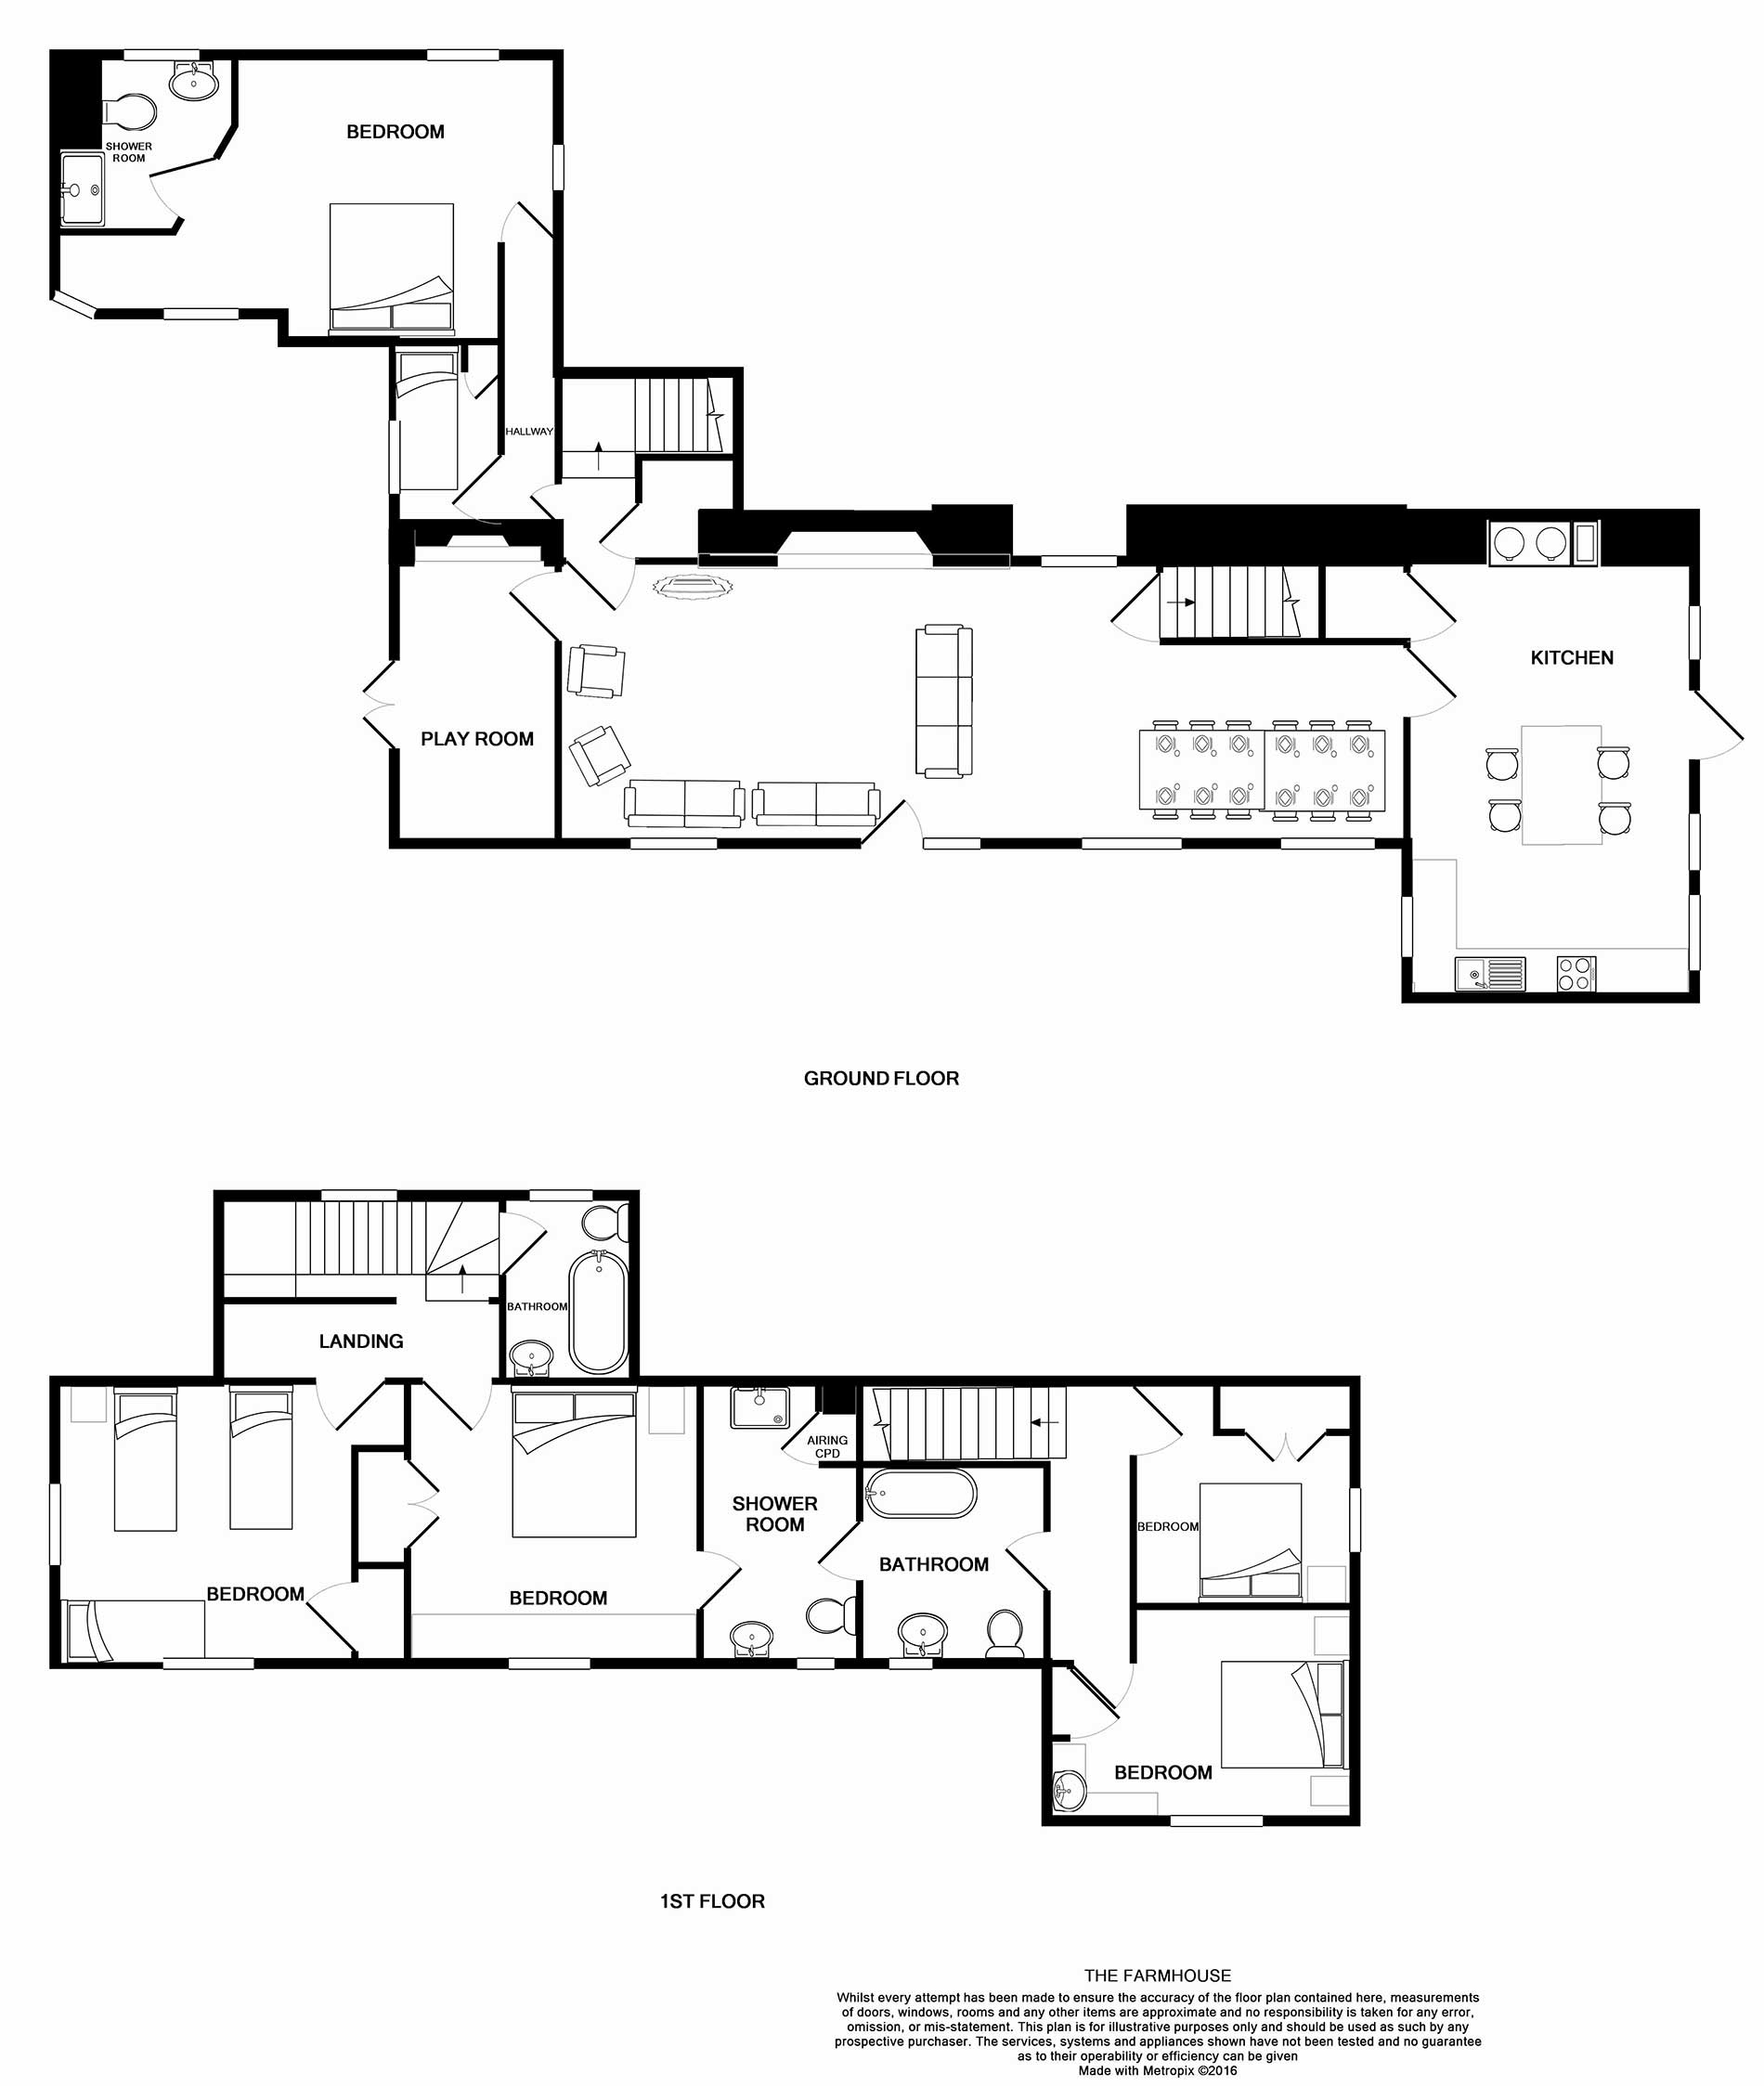 Farmhouse Floor Plan - Luxury Self Catering Holiday ...